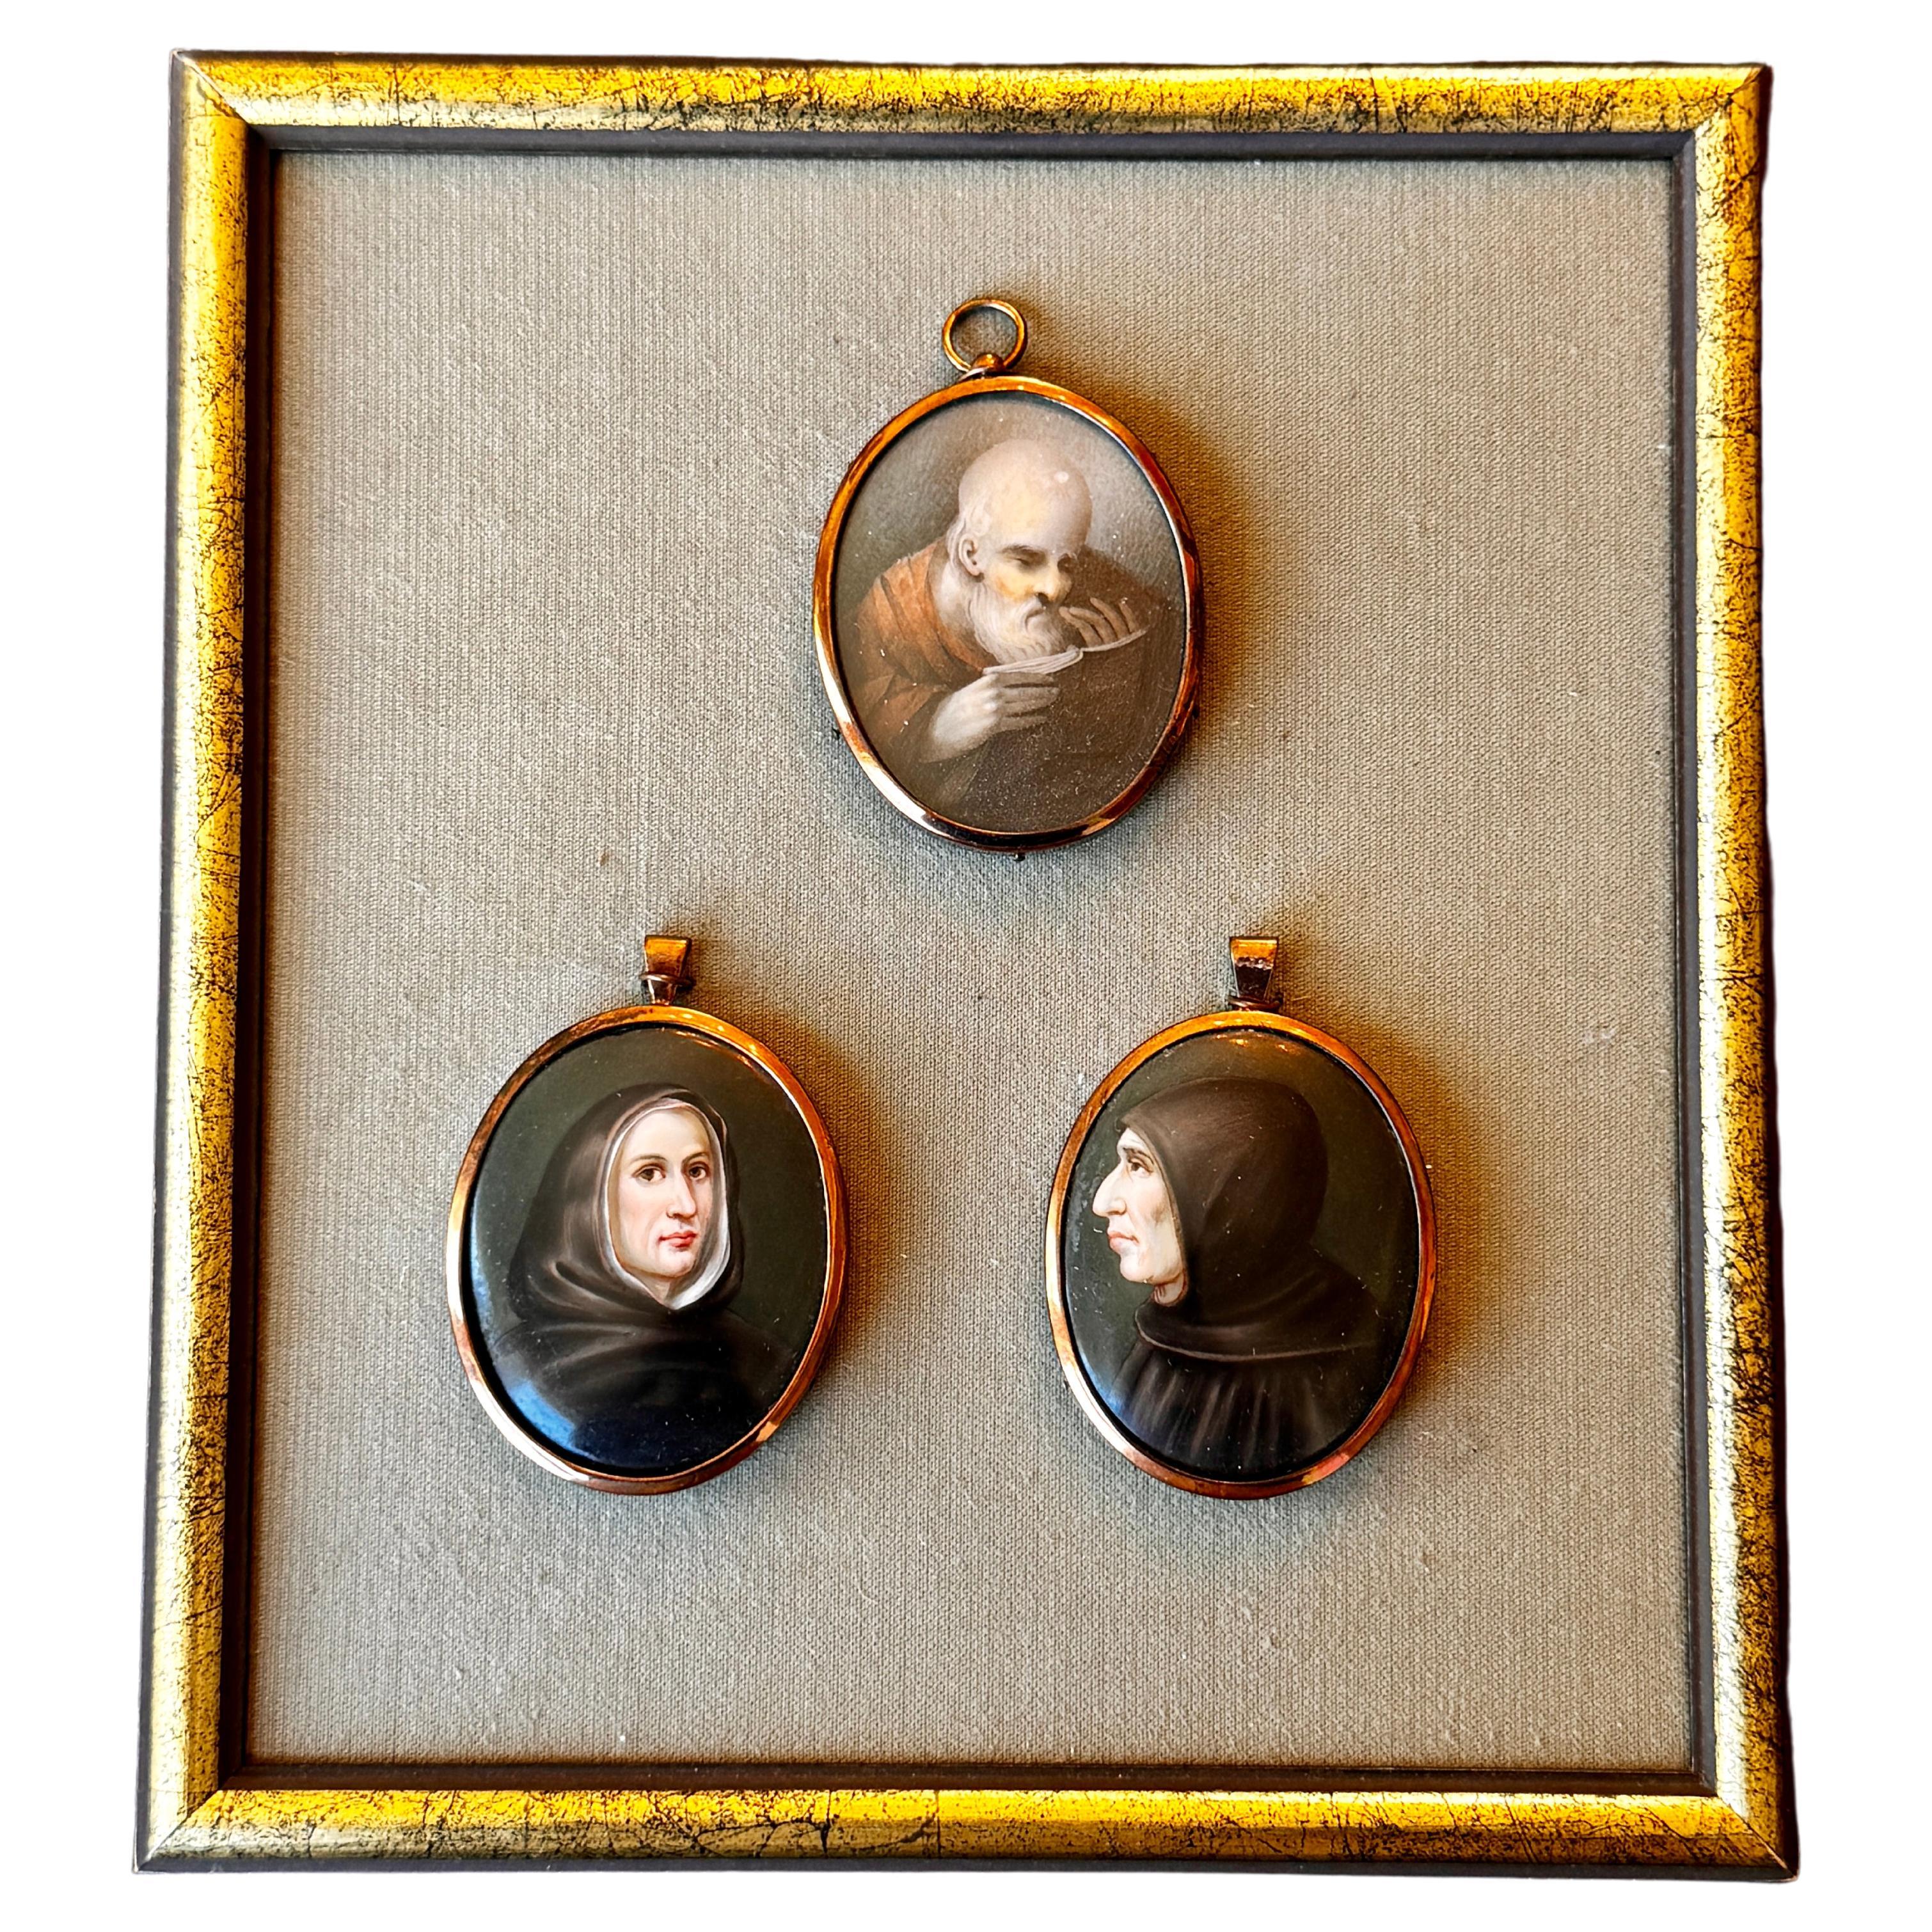 Framed 19th Century Porcelain Miniatures of Monks Hand-Painted  For Sale